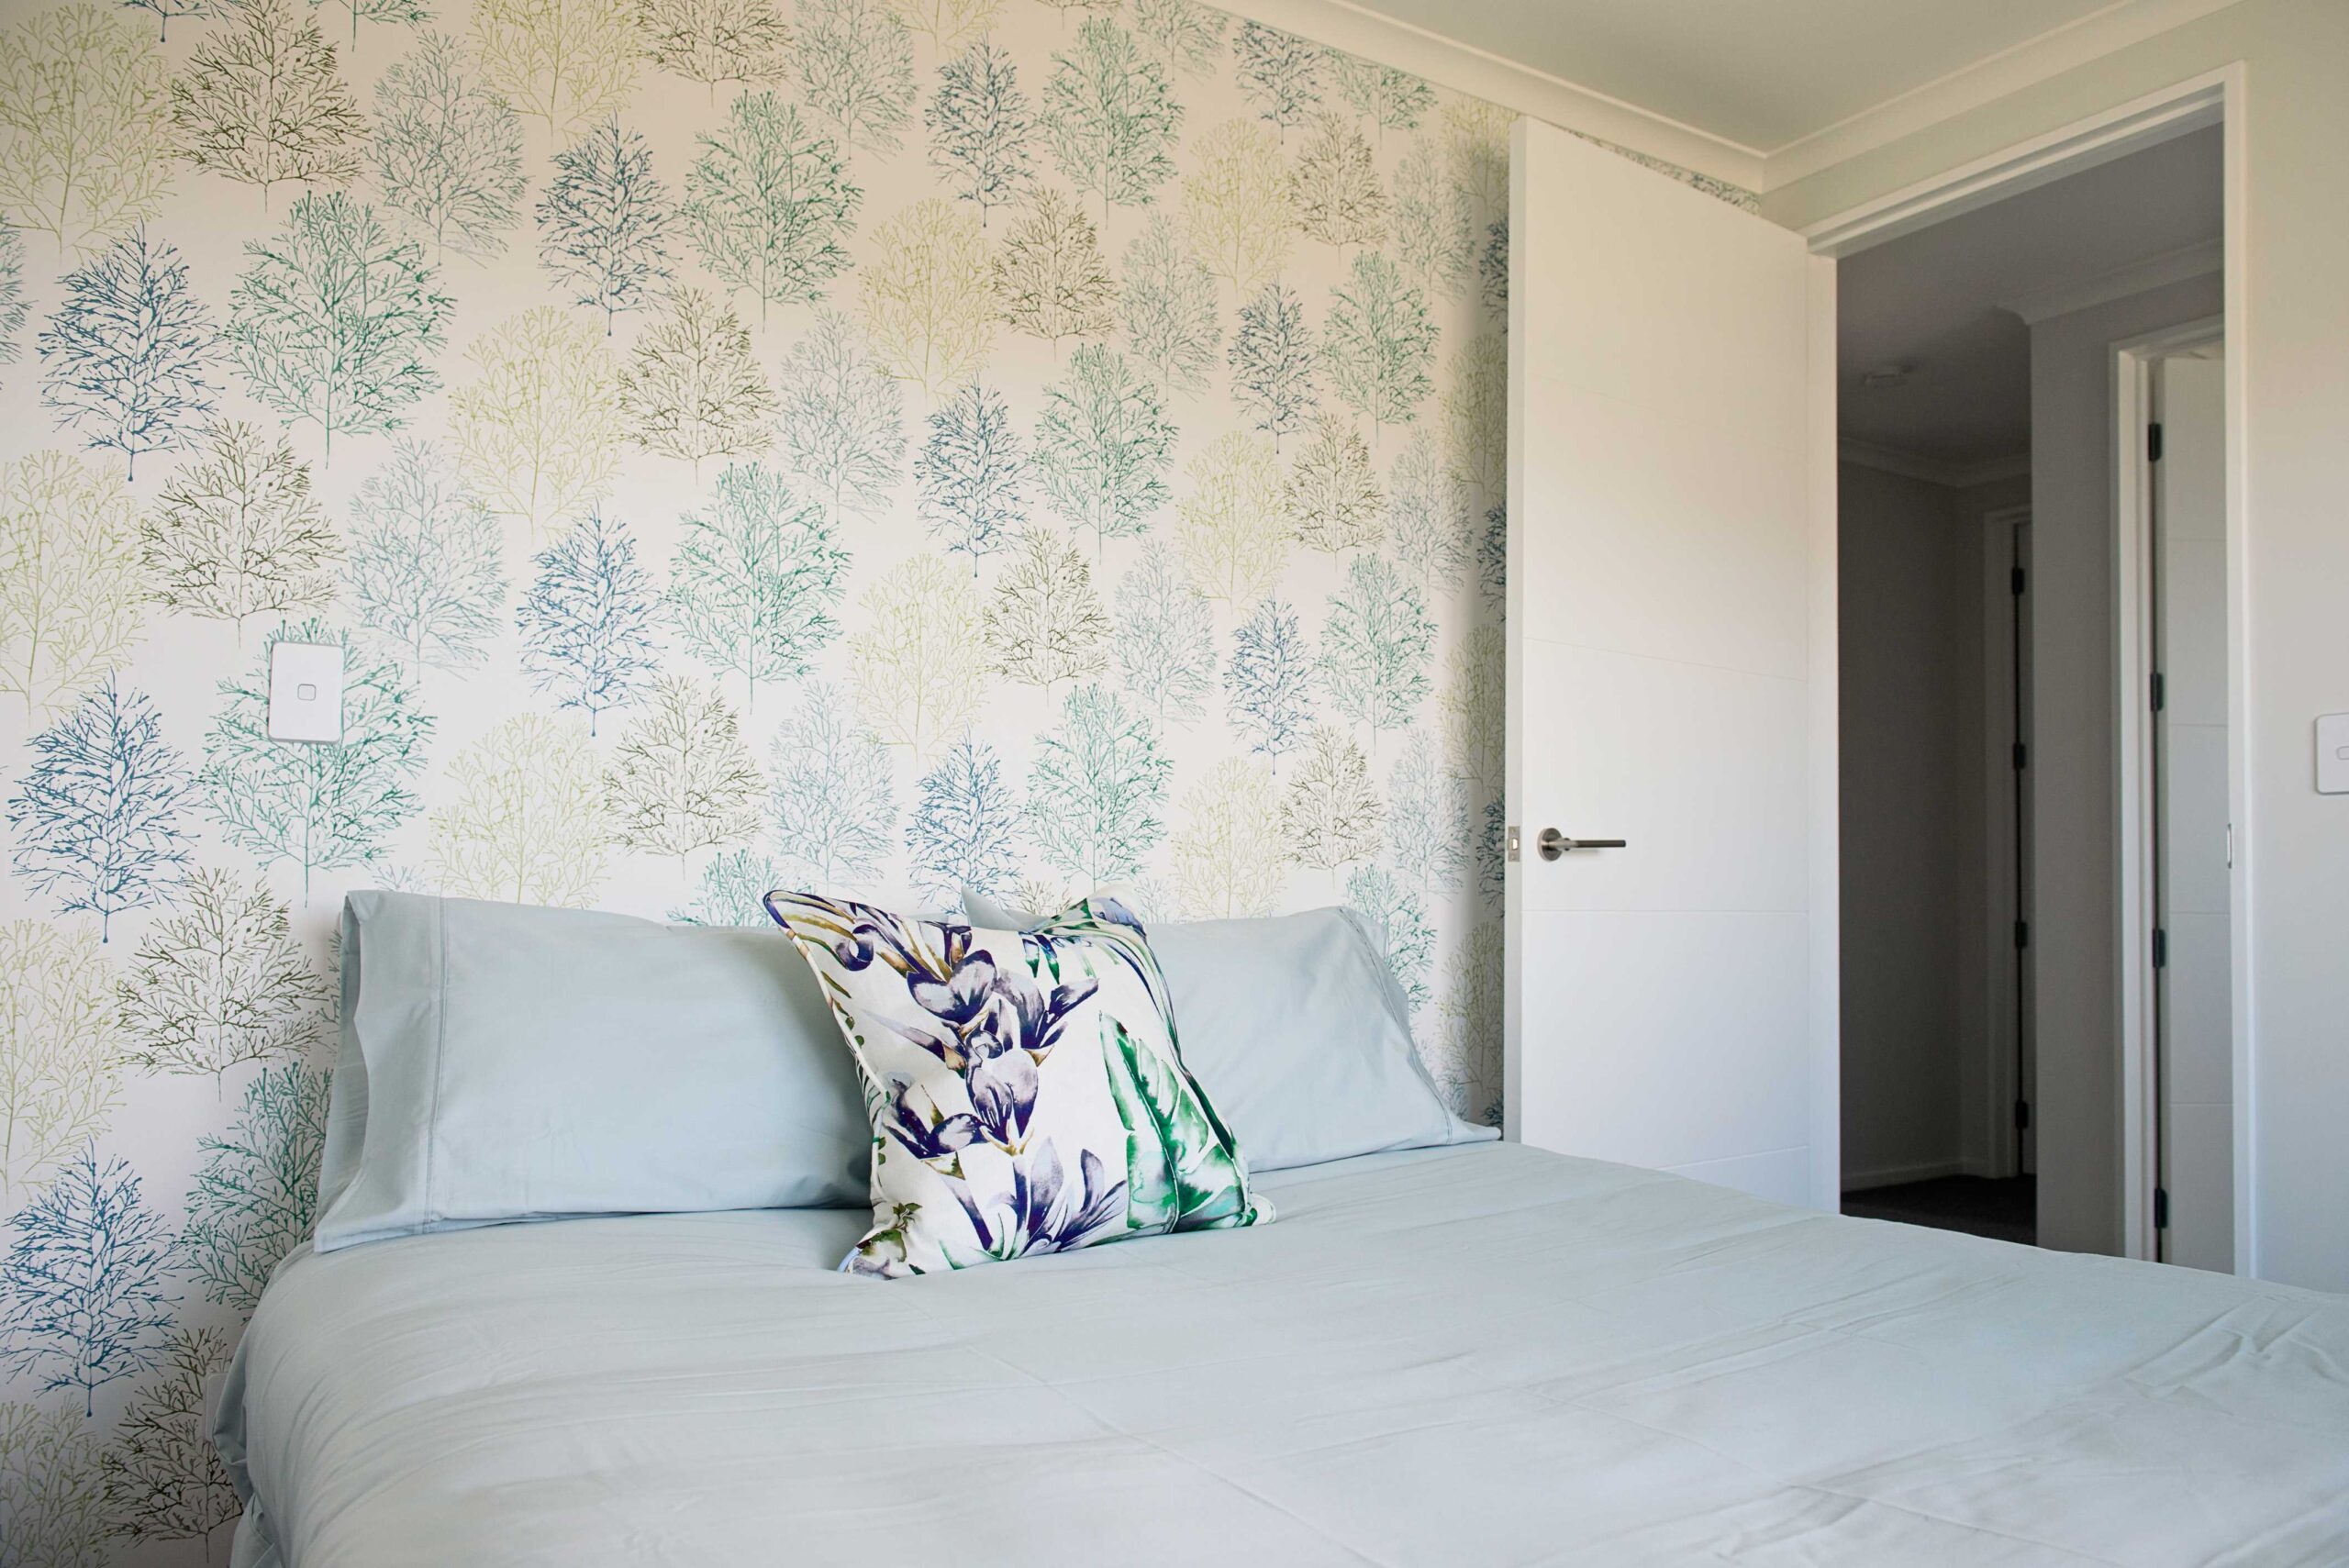  Soft duck egg blues and Scion wallpaper that reflects the alpine trees in Twizel.